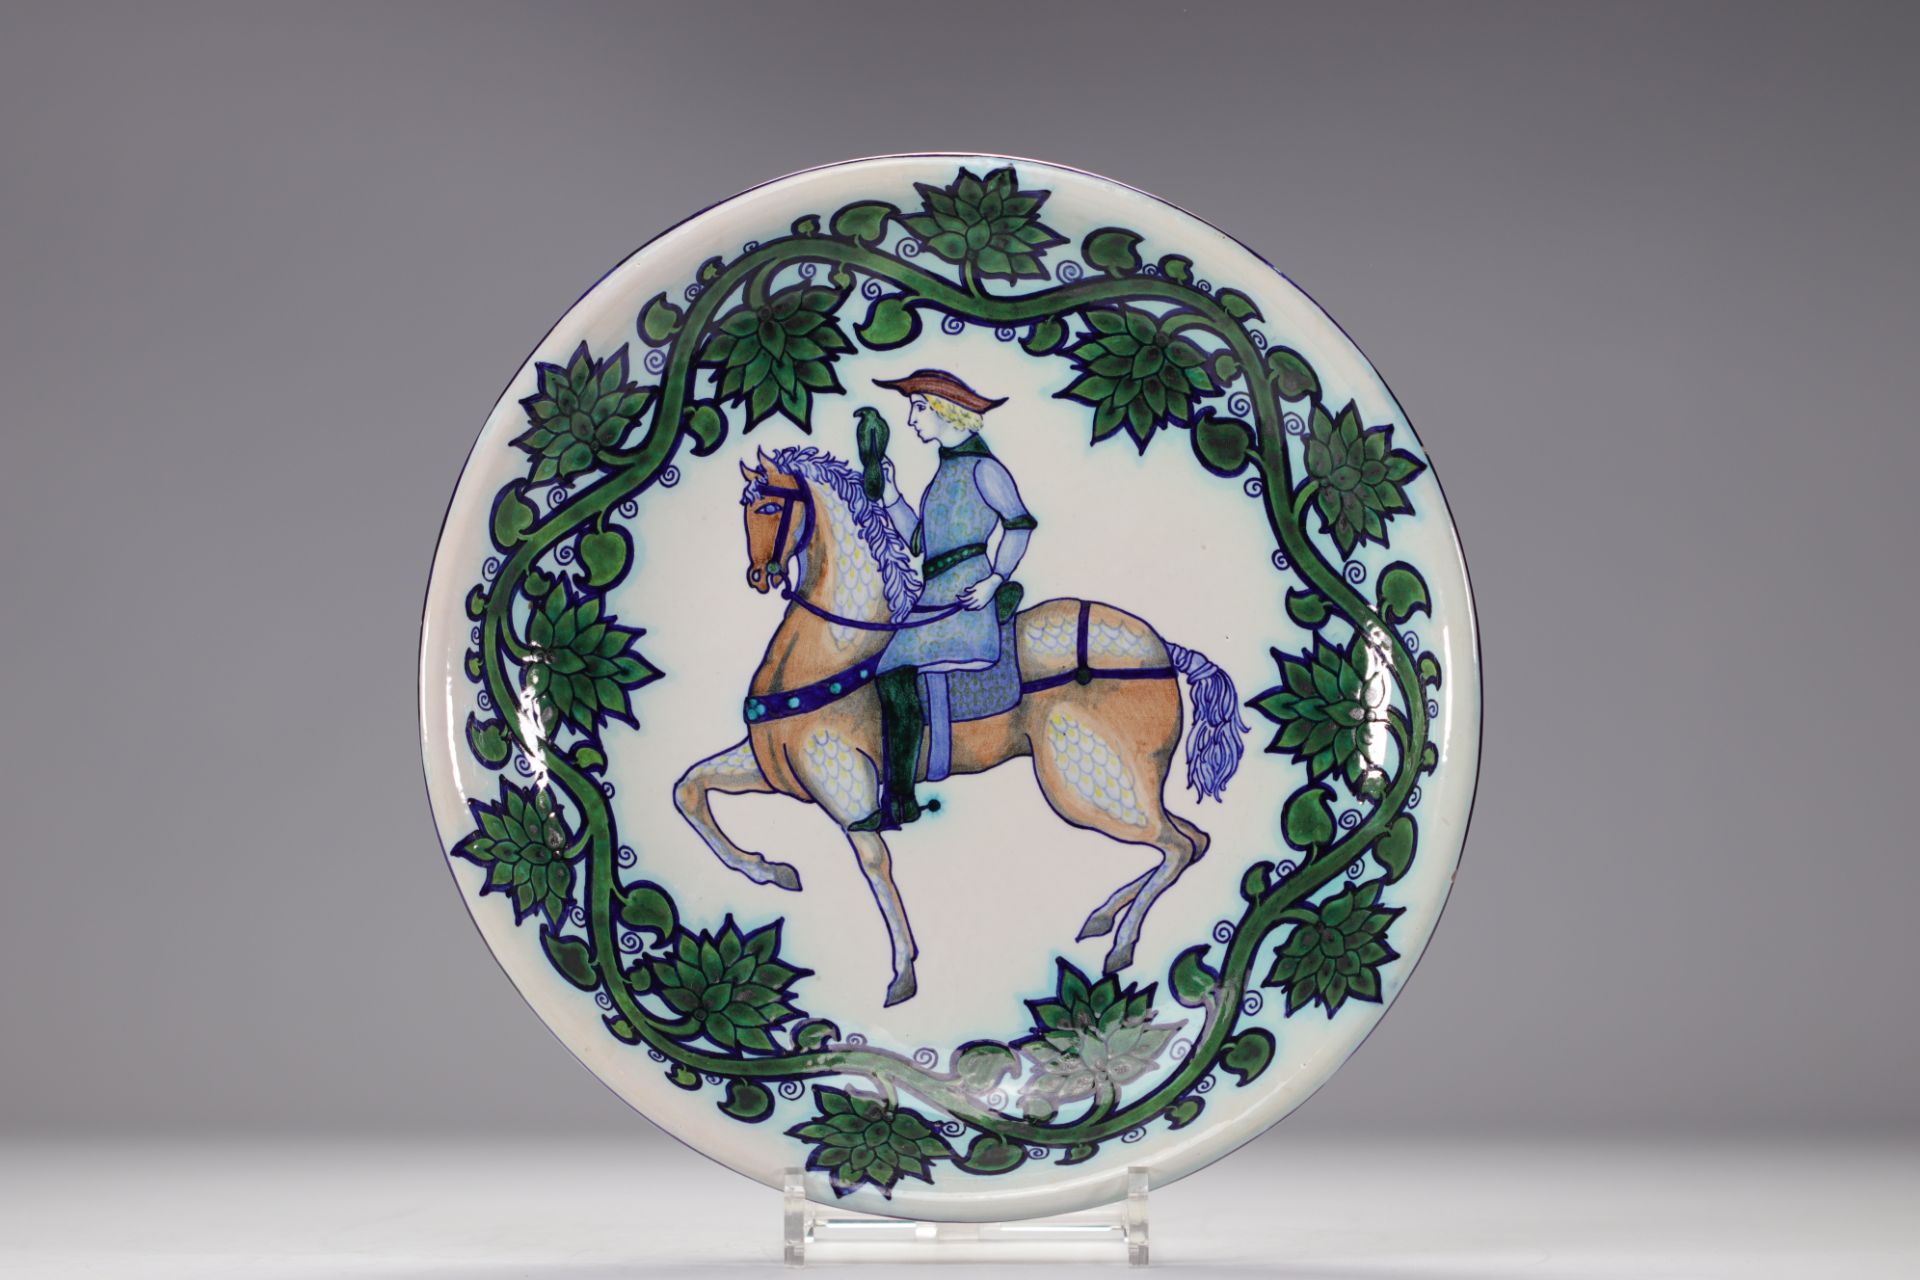 Pietro MELANDRI (1885-1976) dish decorated with a rider and his horse in the Renaissance style